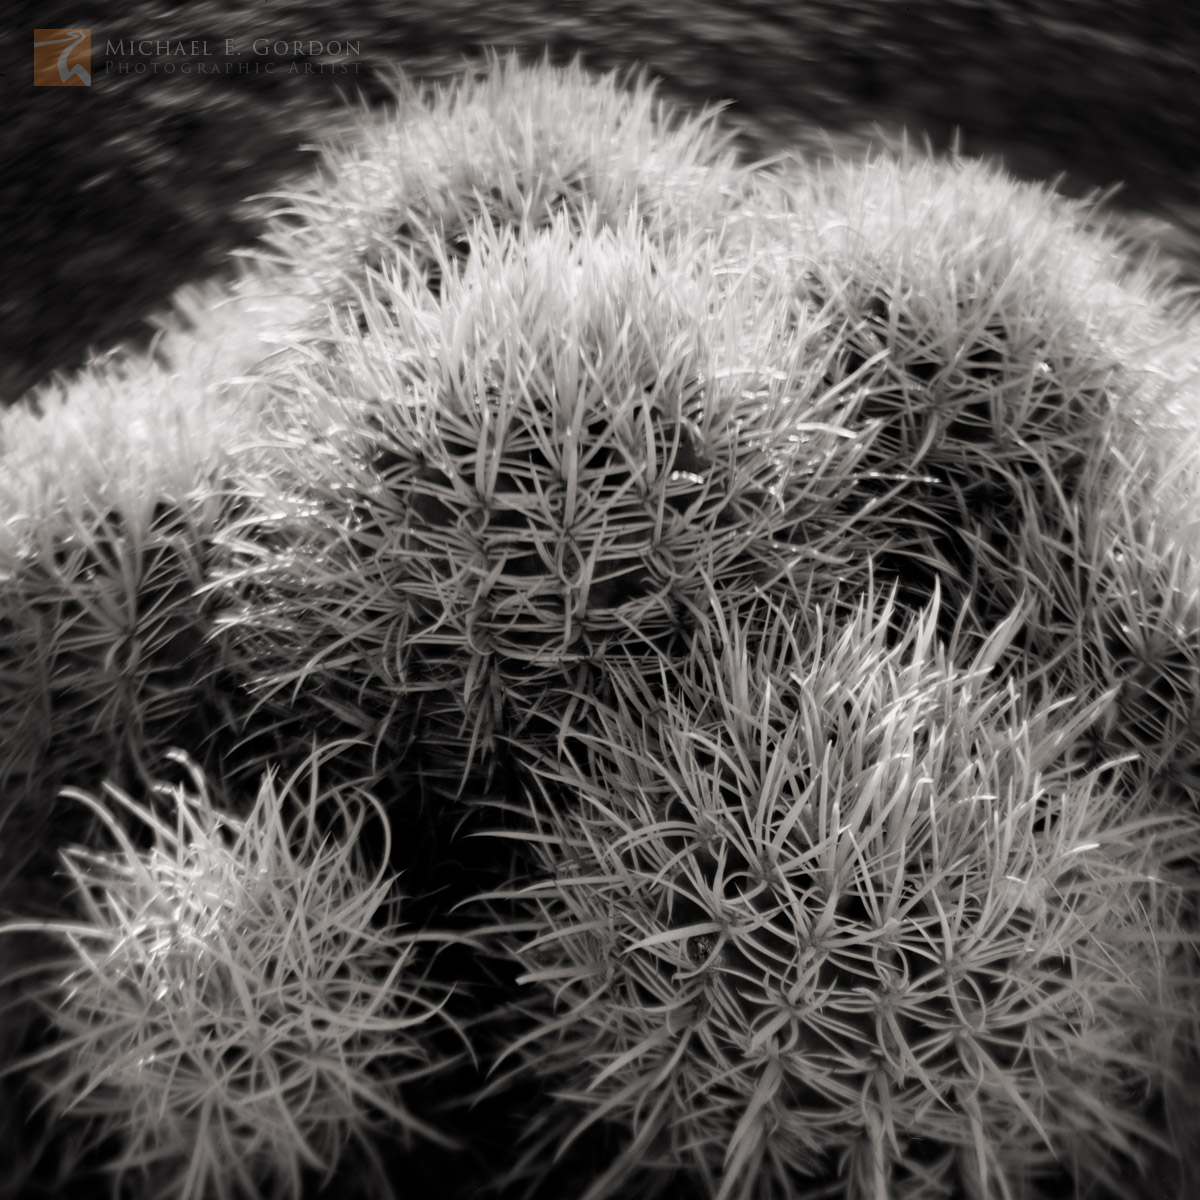 Afternoon backlight on&nbsp;Cottontop Cactus (Echinocactus polycephalus).Logos and watermarks are not found on any printed product...